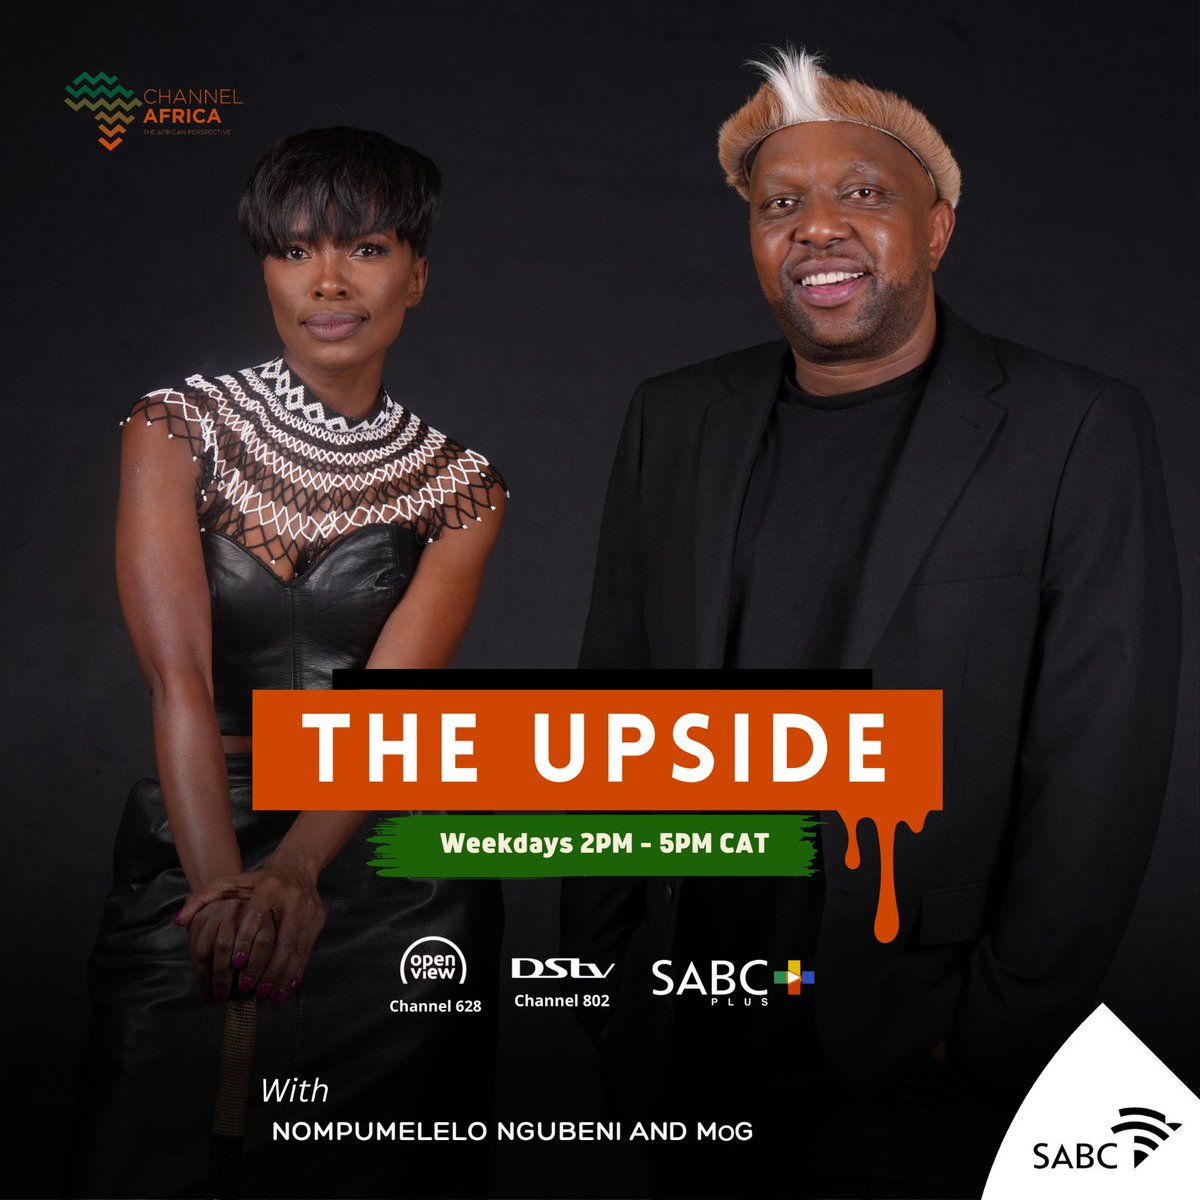 Welcome to #TheUpside with @mog_moments & @MpumiNgubeni until 17:00 CAT.

Tune in: @SABCPlus app | DSTV 802| Open View 628

Stream: bit.ly/Listen2Channel…